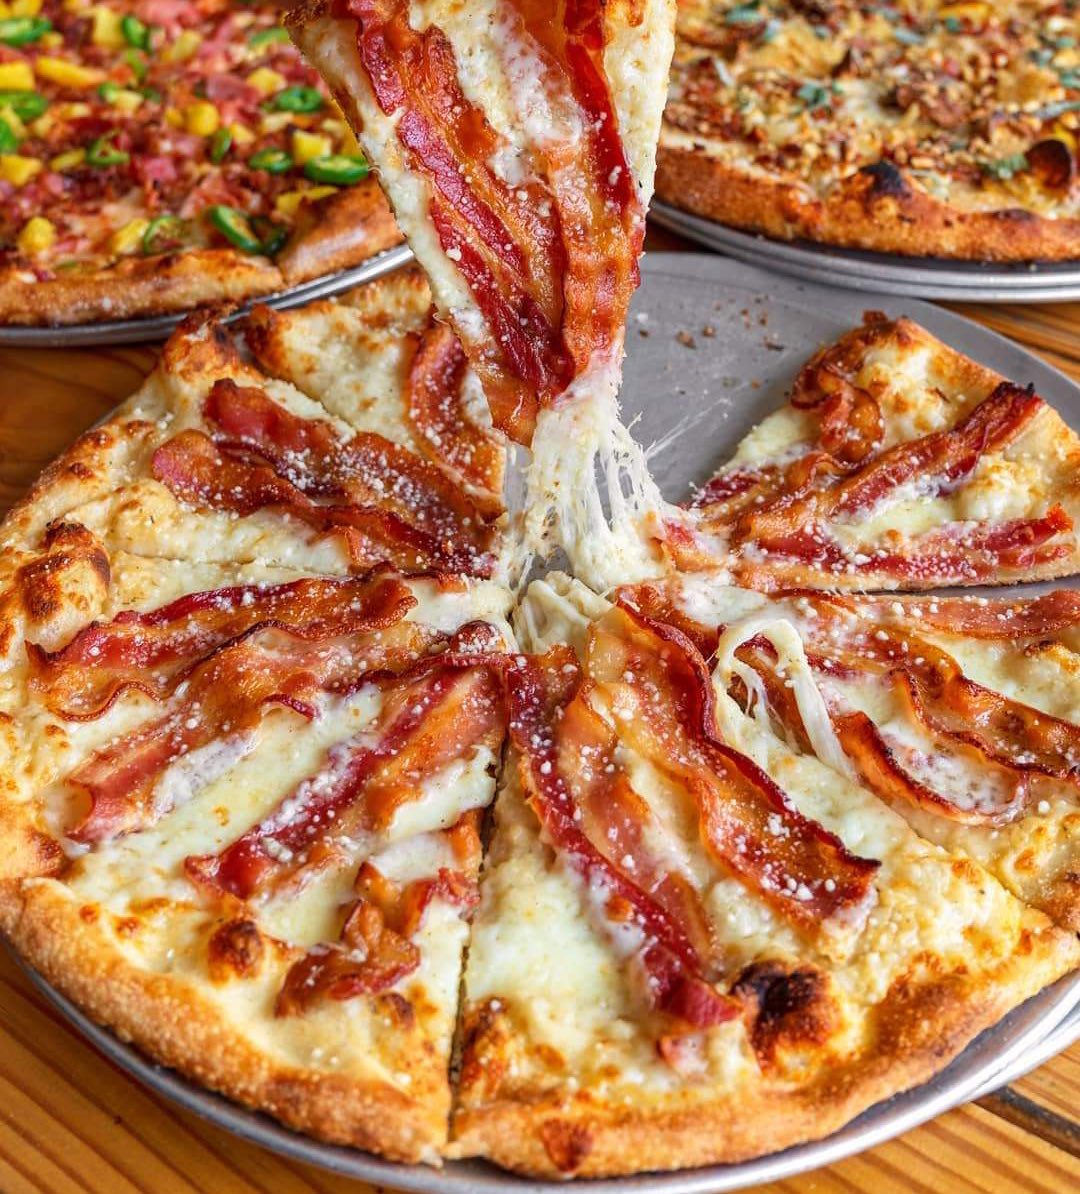 Bacon and Cheese Pizza…

Yes or No? 🤔